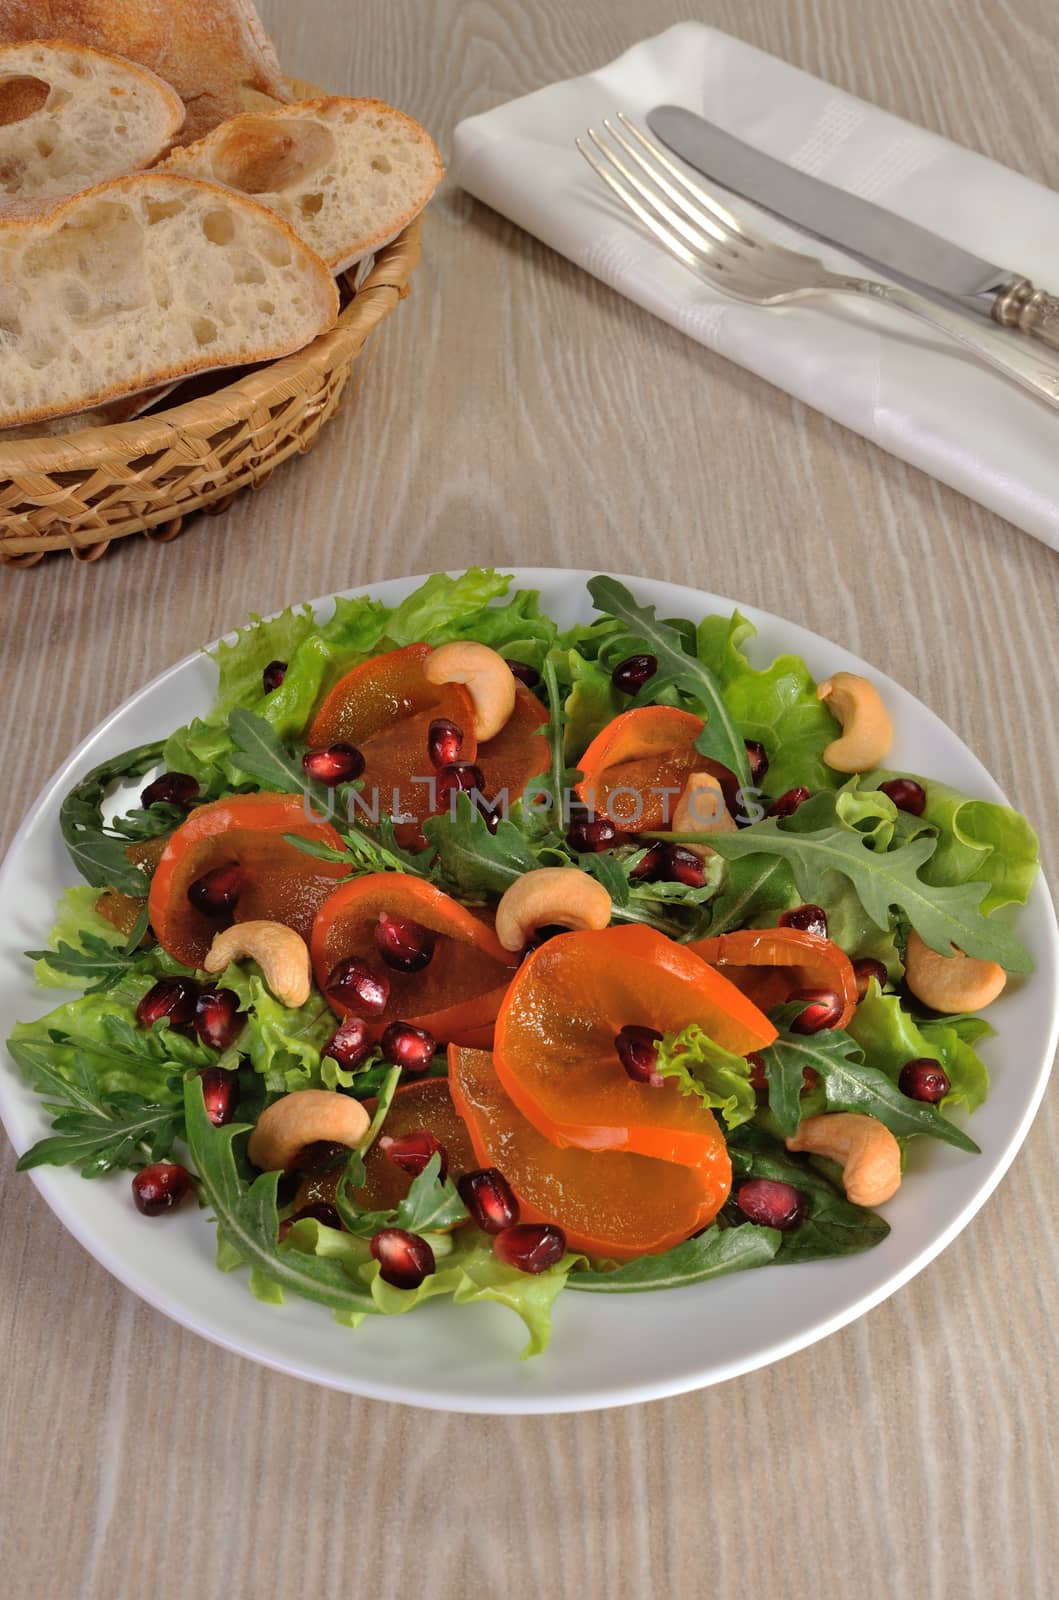 salad of spinach, arugula, lettuce, persimmon, pomegranate and cashews